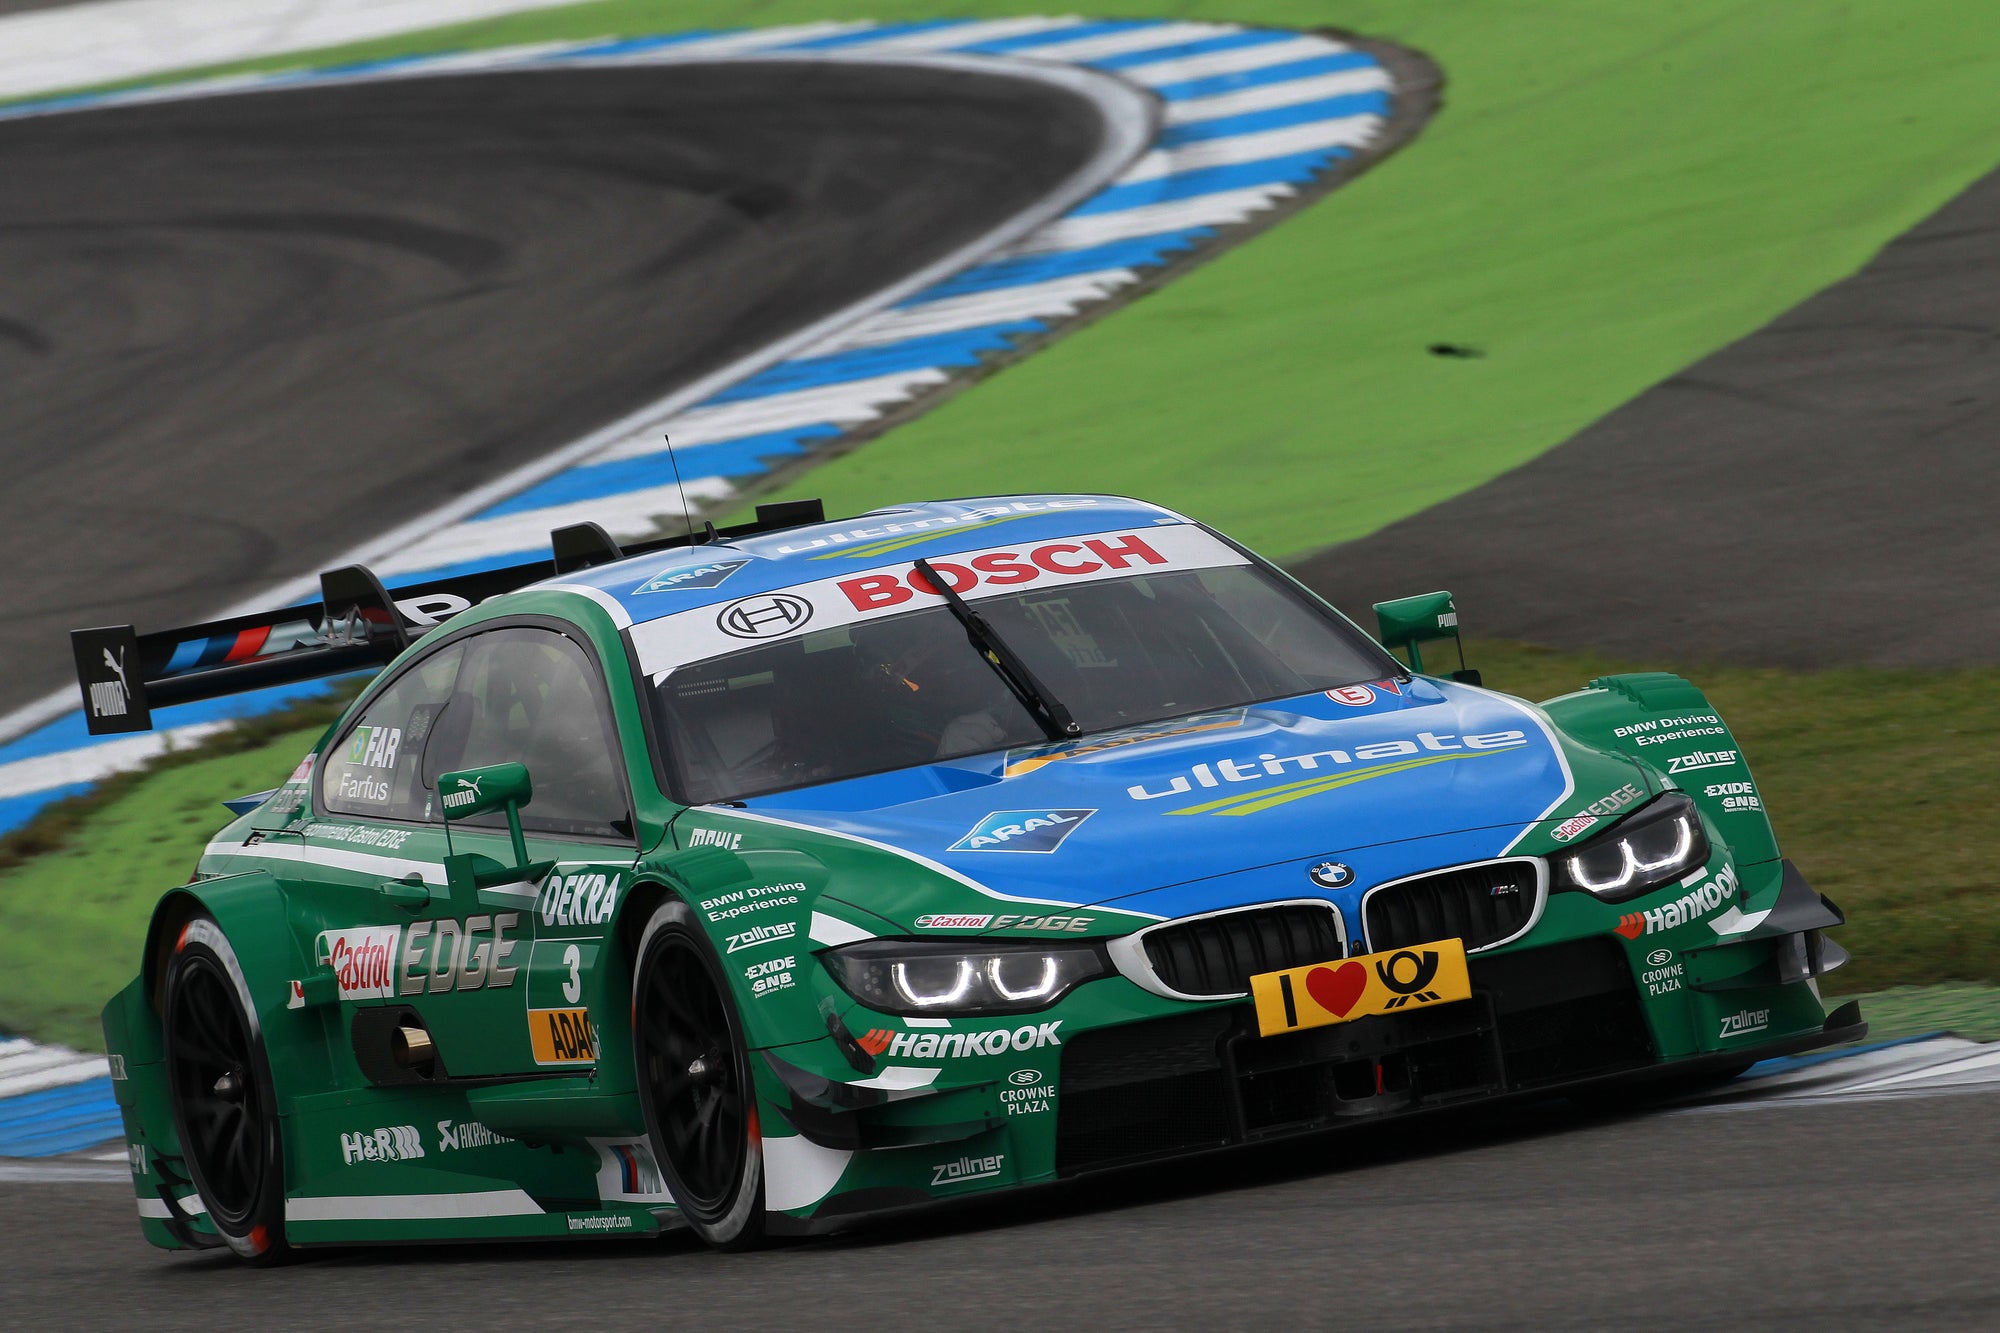 Castrol rejoins as a BMW's Fluid Provider in 2021